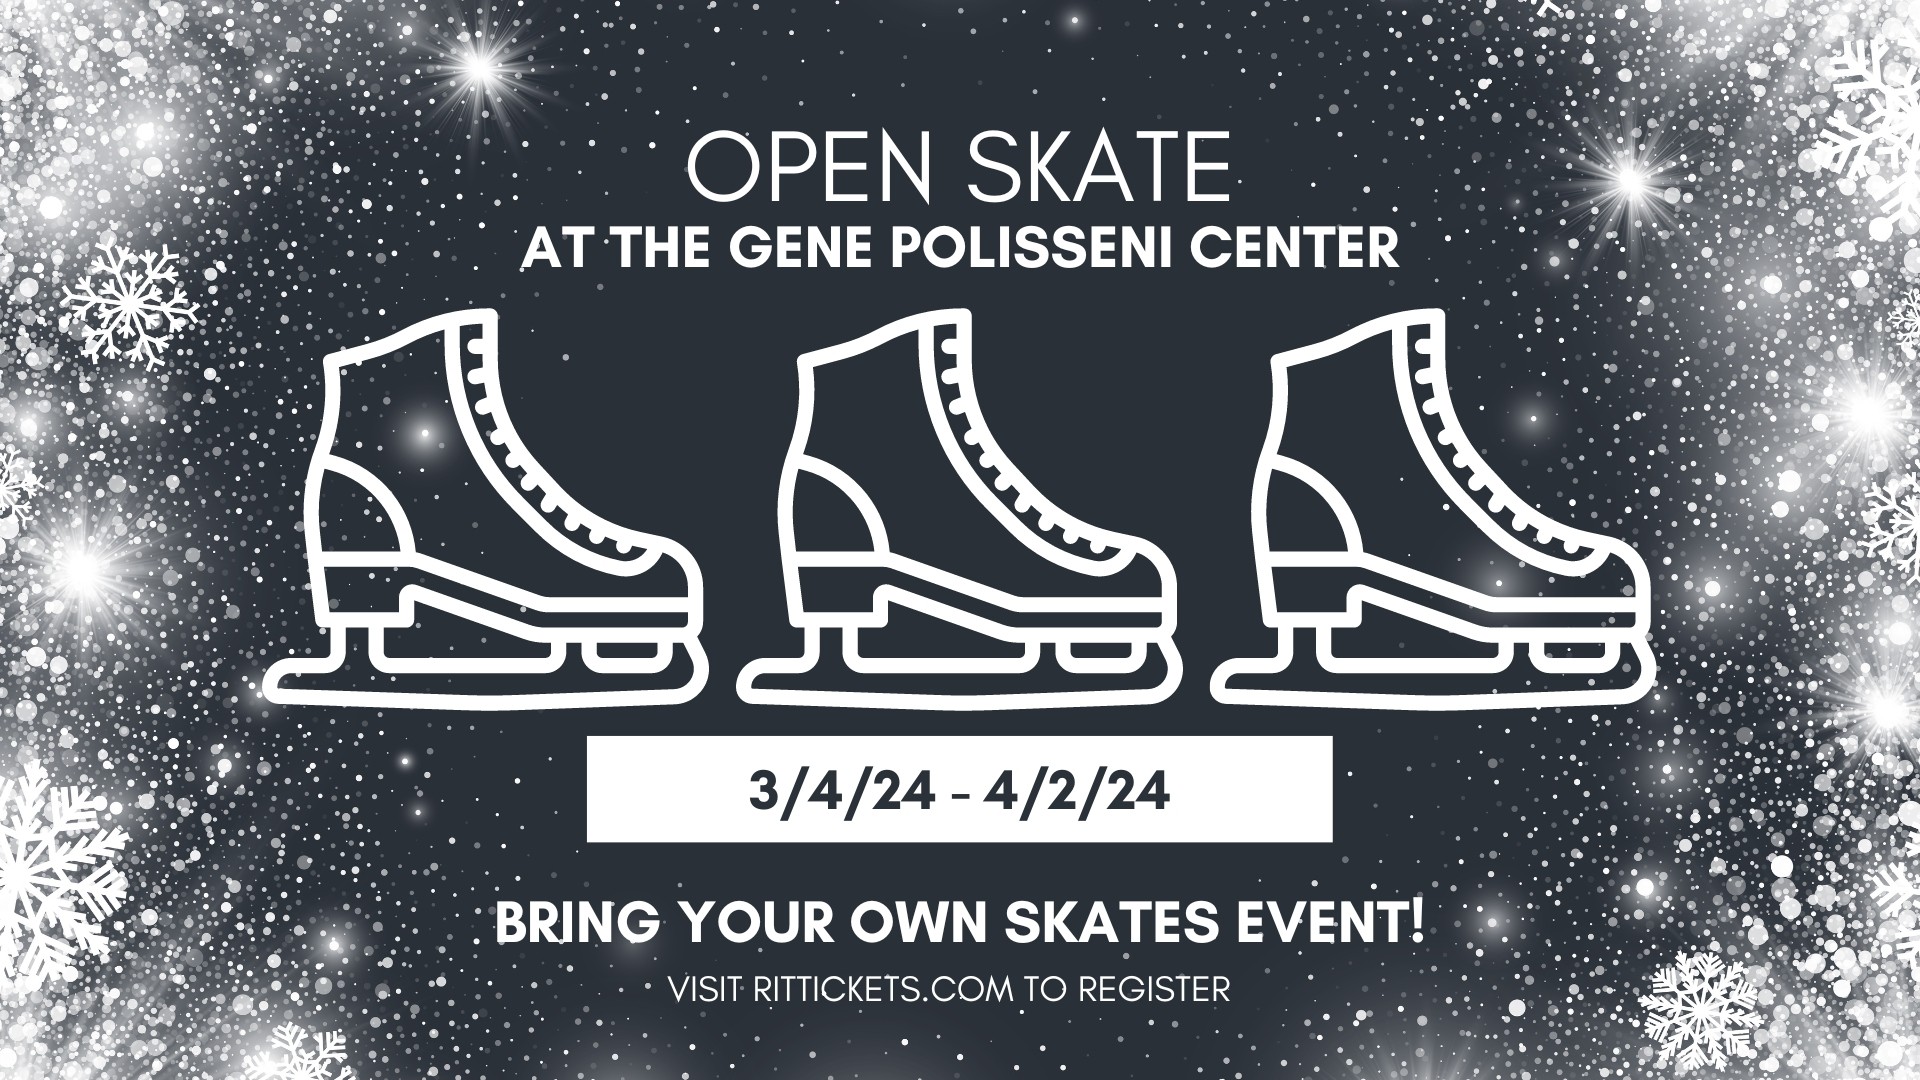 ice skates with open skate information